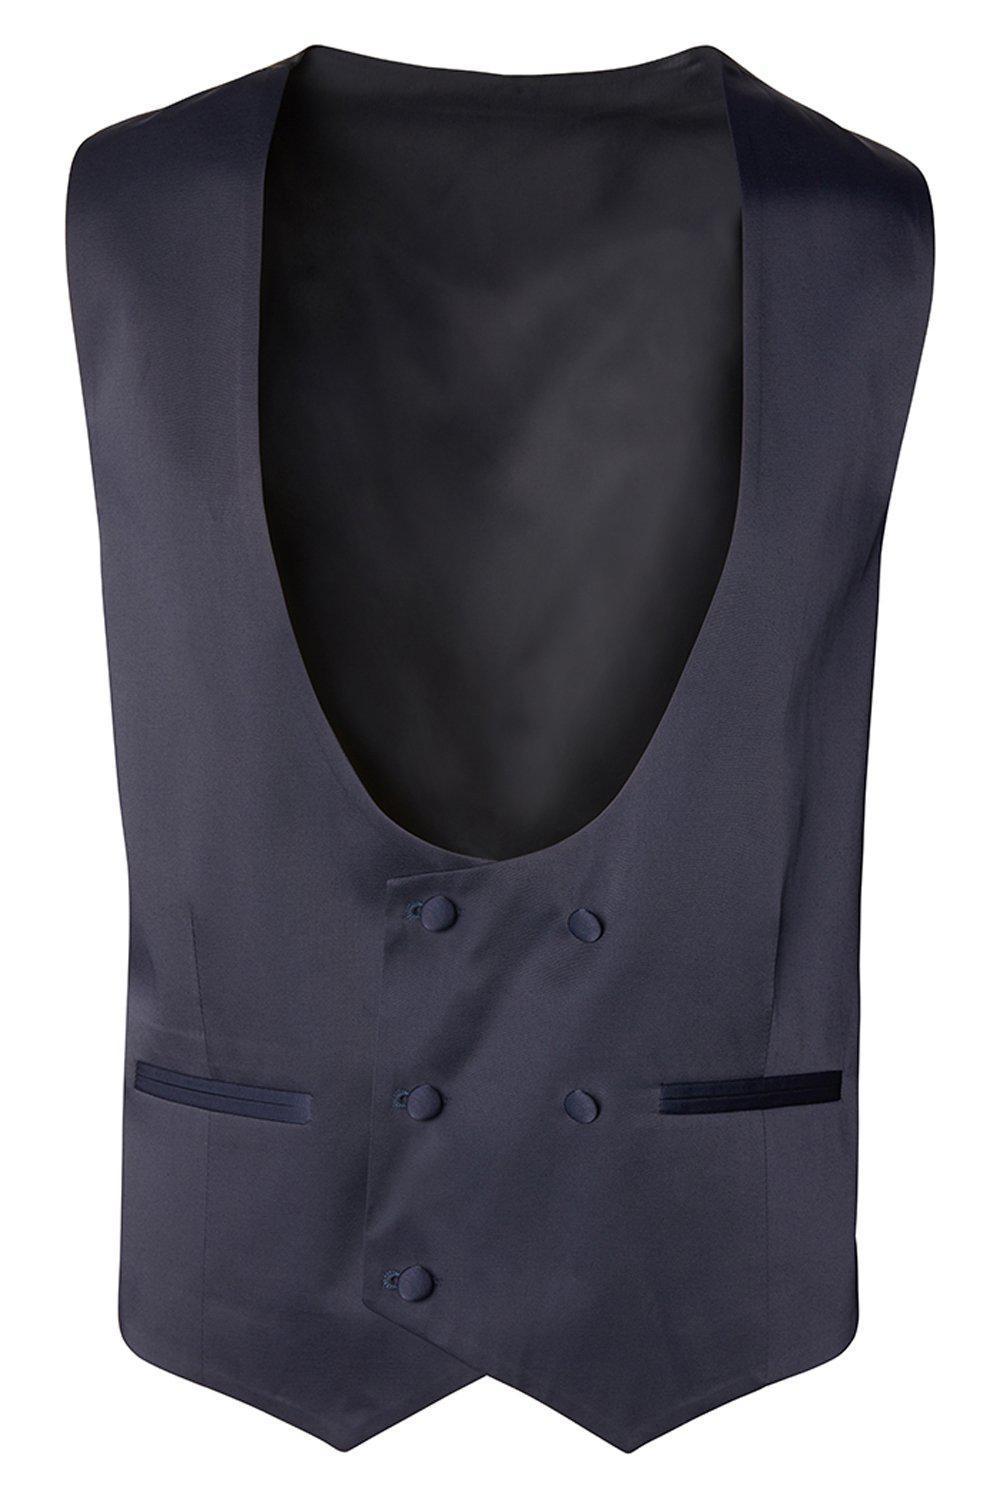 U SHAPED DOUBLE BREASTED VEST - NAVY - Ron Tomson